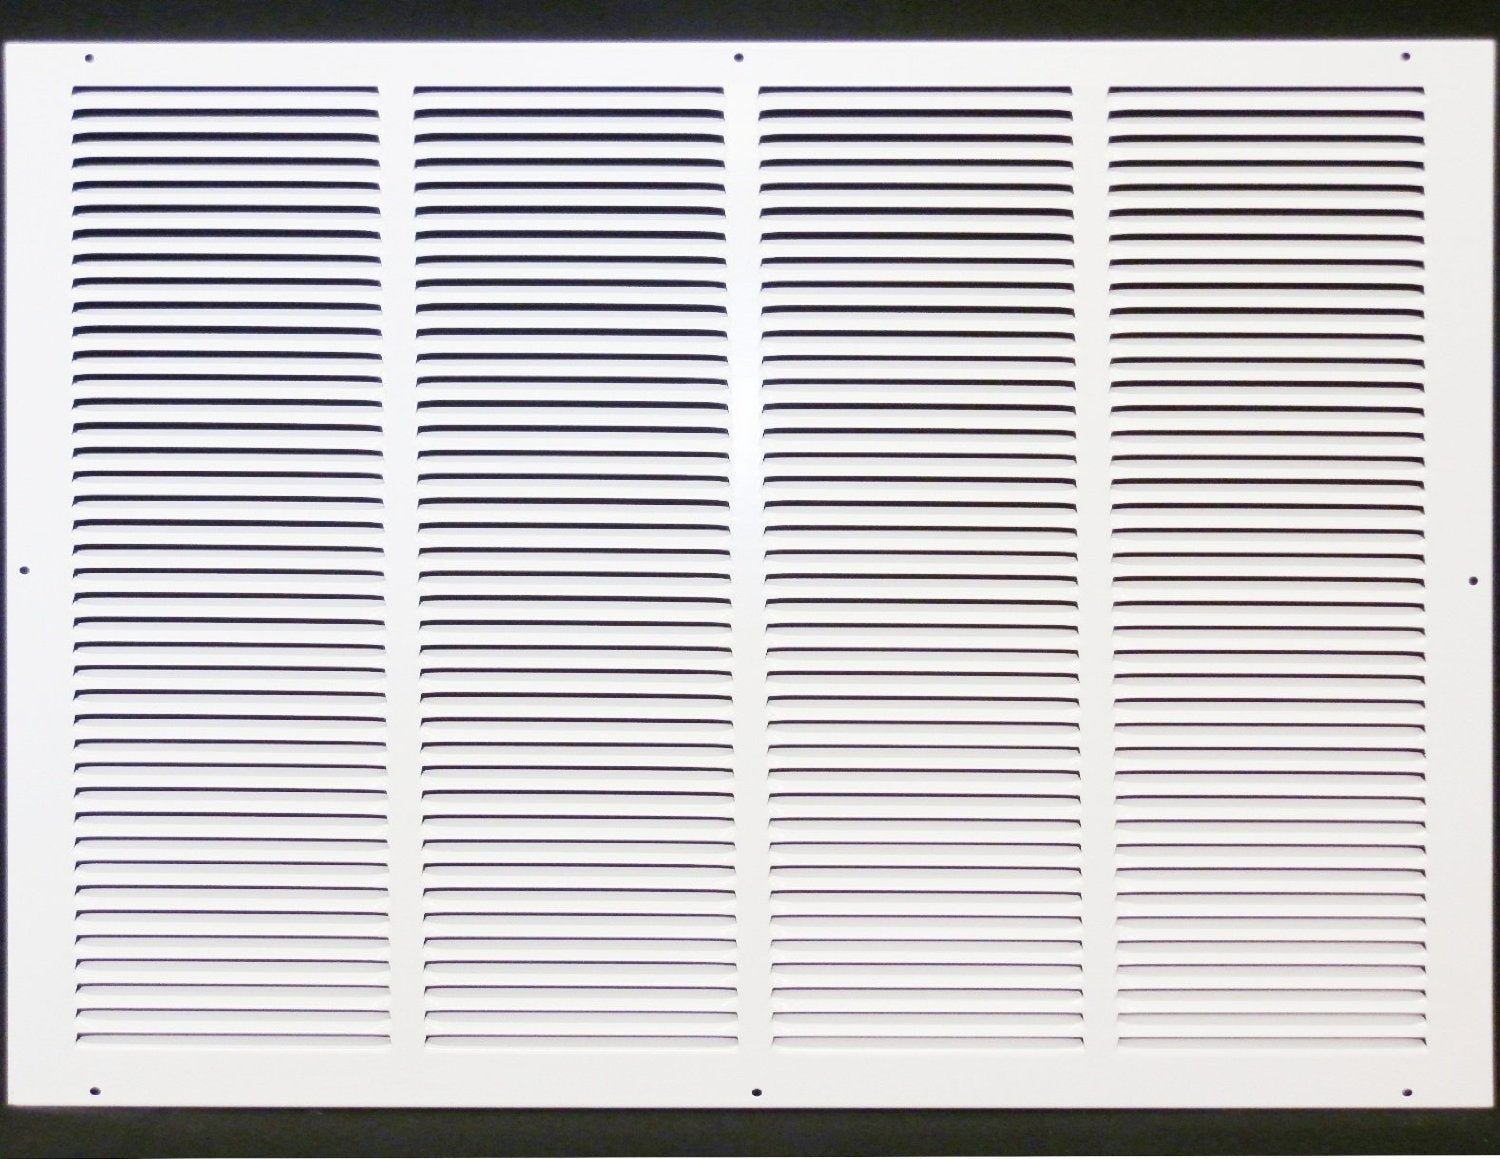 24" X 16" Air Vent Return Grilles - Sidewall and Ceiling - Steel